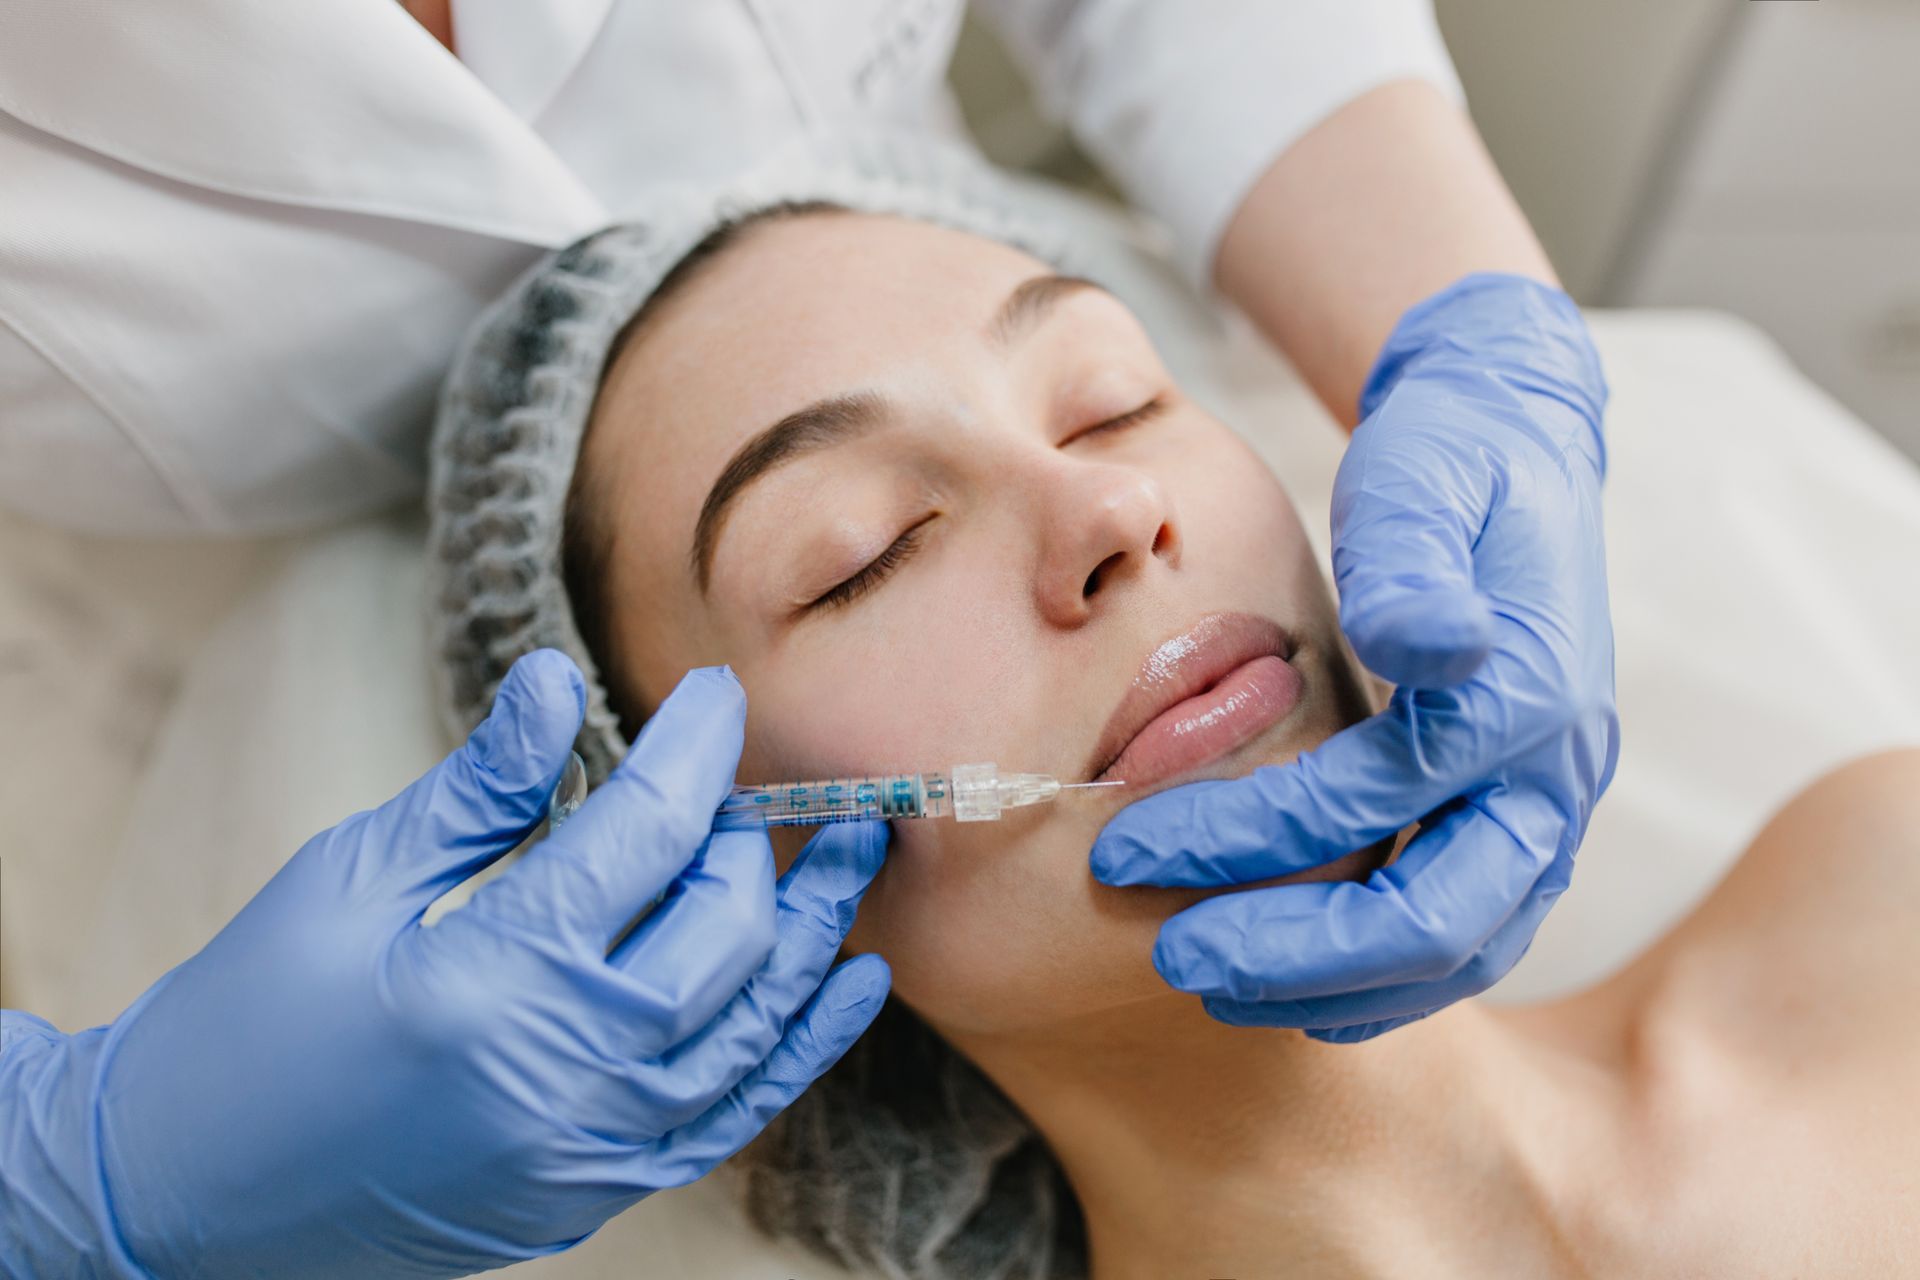 A woman is getting a botox injection in her lips.